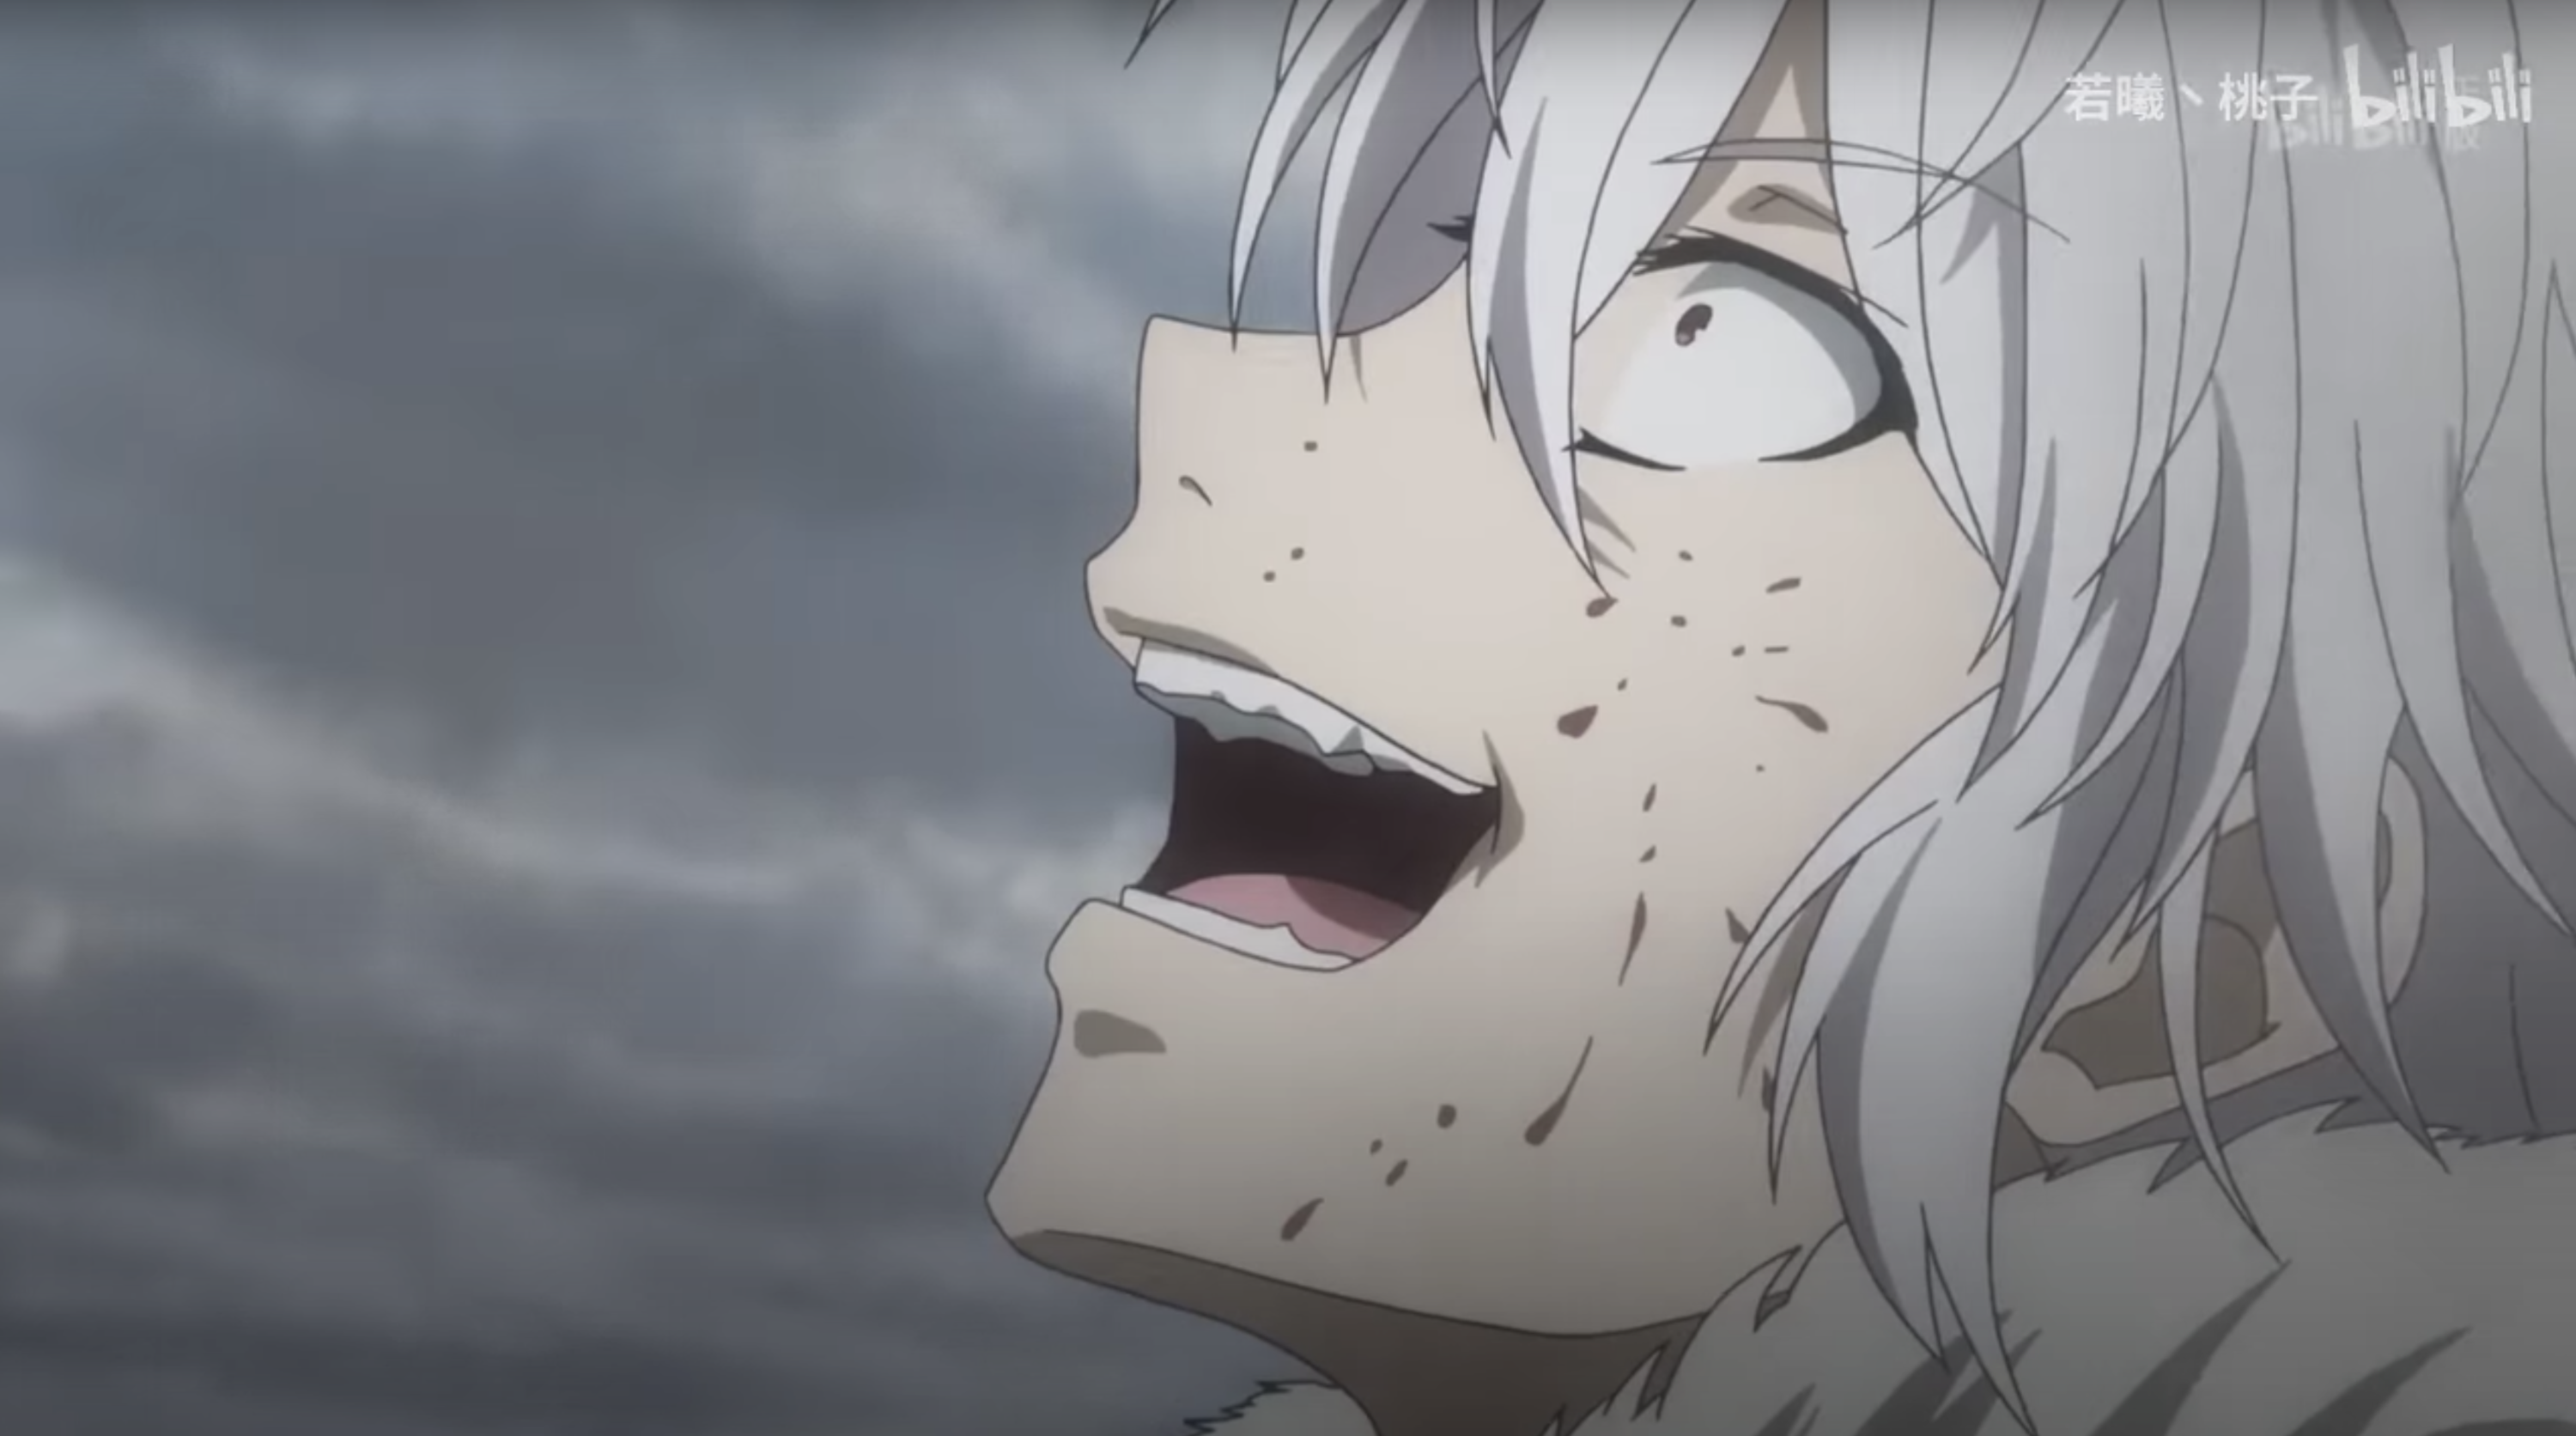 Accelerator laughing maniacally with blood on his face